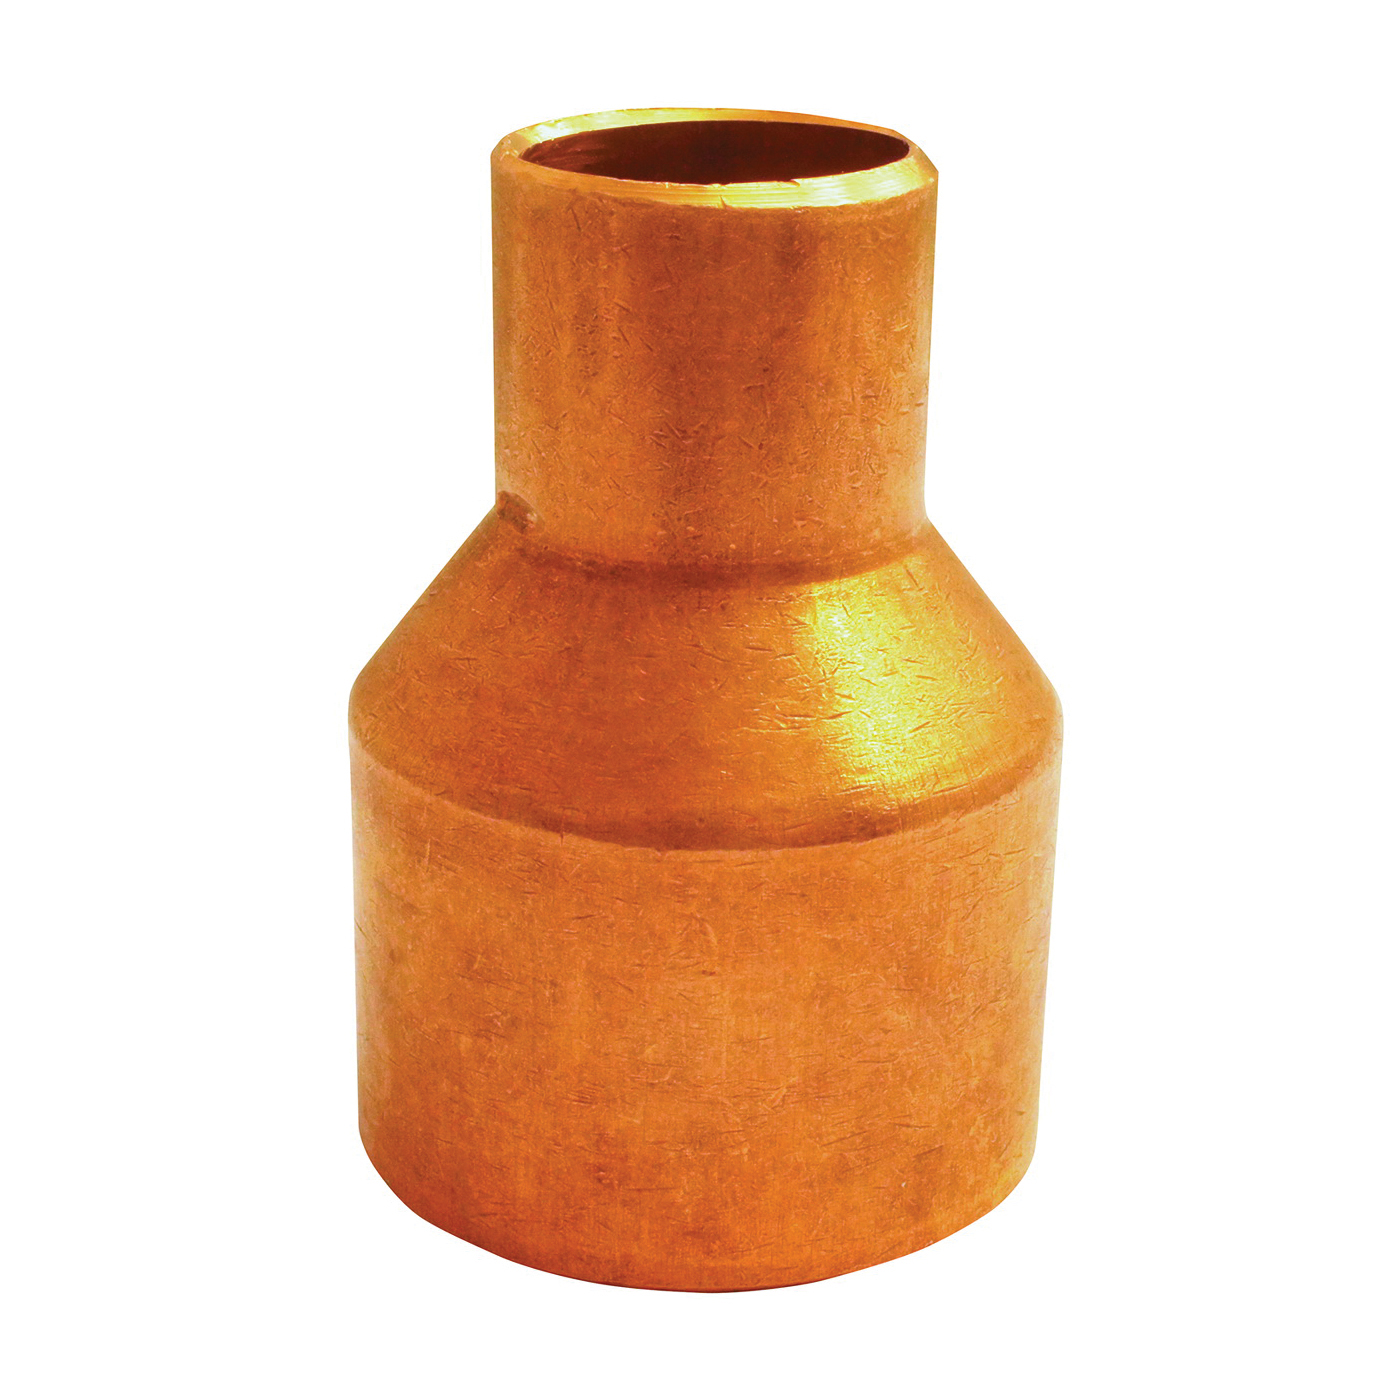 101R Series 30772 Reducing Pipe Coupling with Stop, 1-1/2 x 3/4 in, Sweat